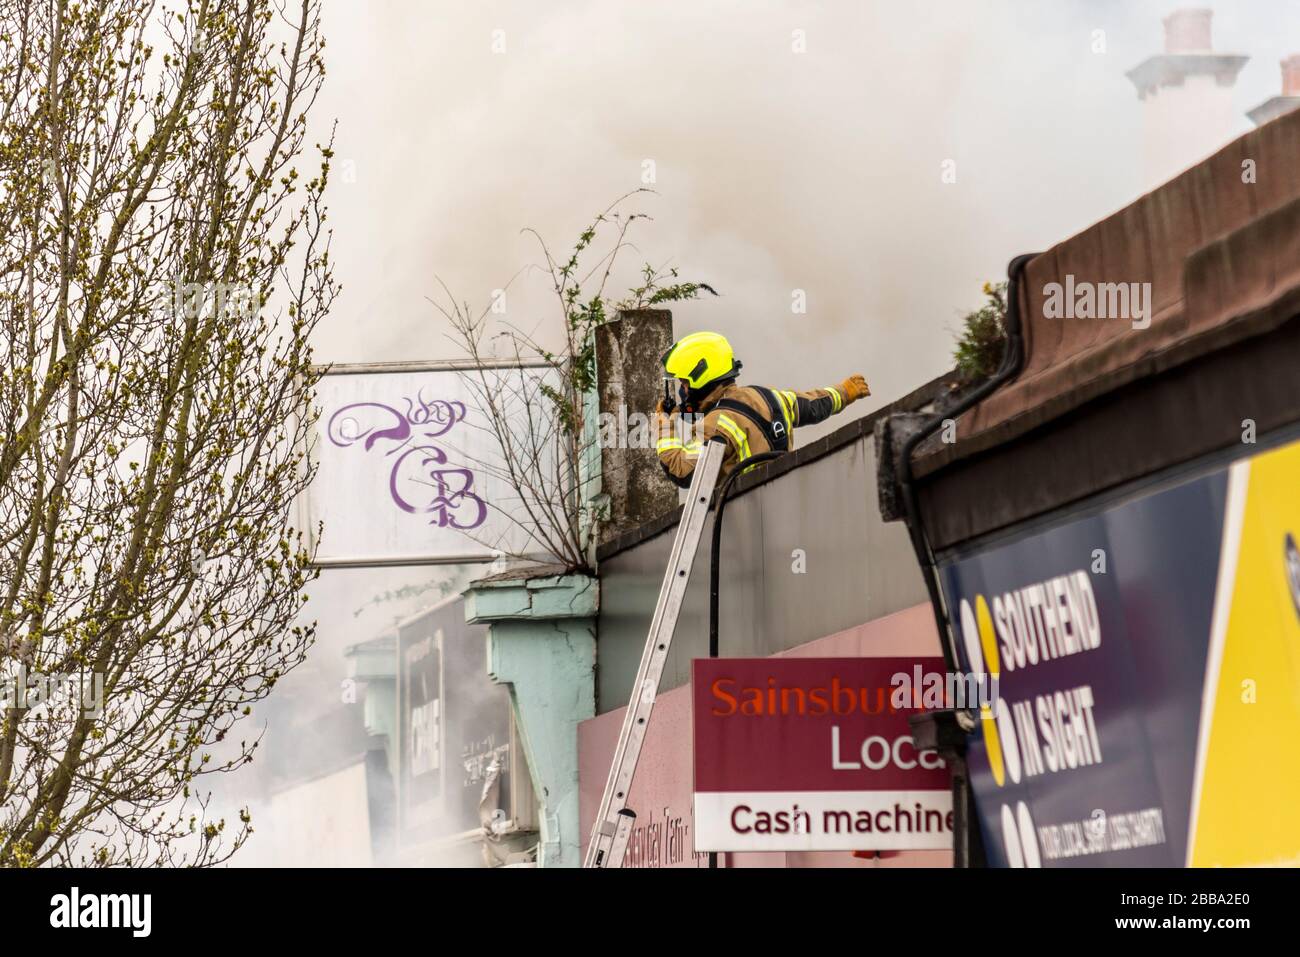 Fire Service dealing with a fire next to Sainsbury's supermarket in Westcliff on Sea, Essex, UK during COVID-19 lockdown. Fire fighter directing radio Stock Photo